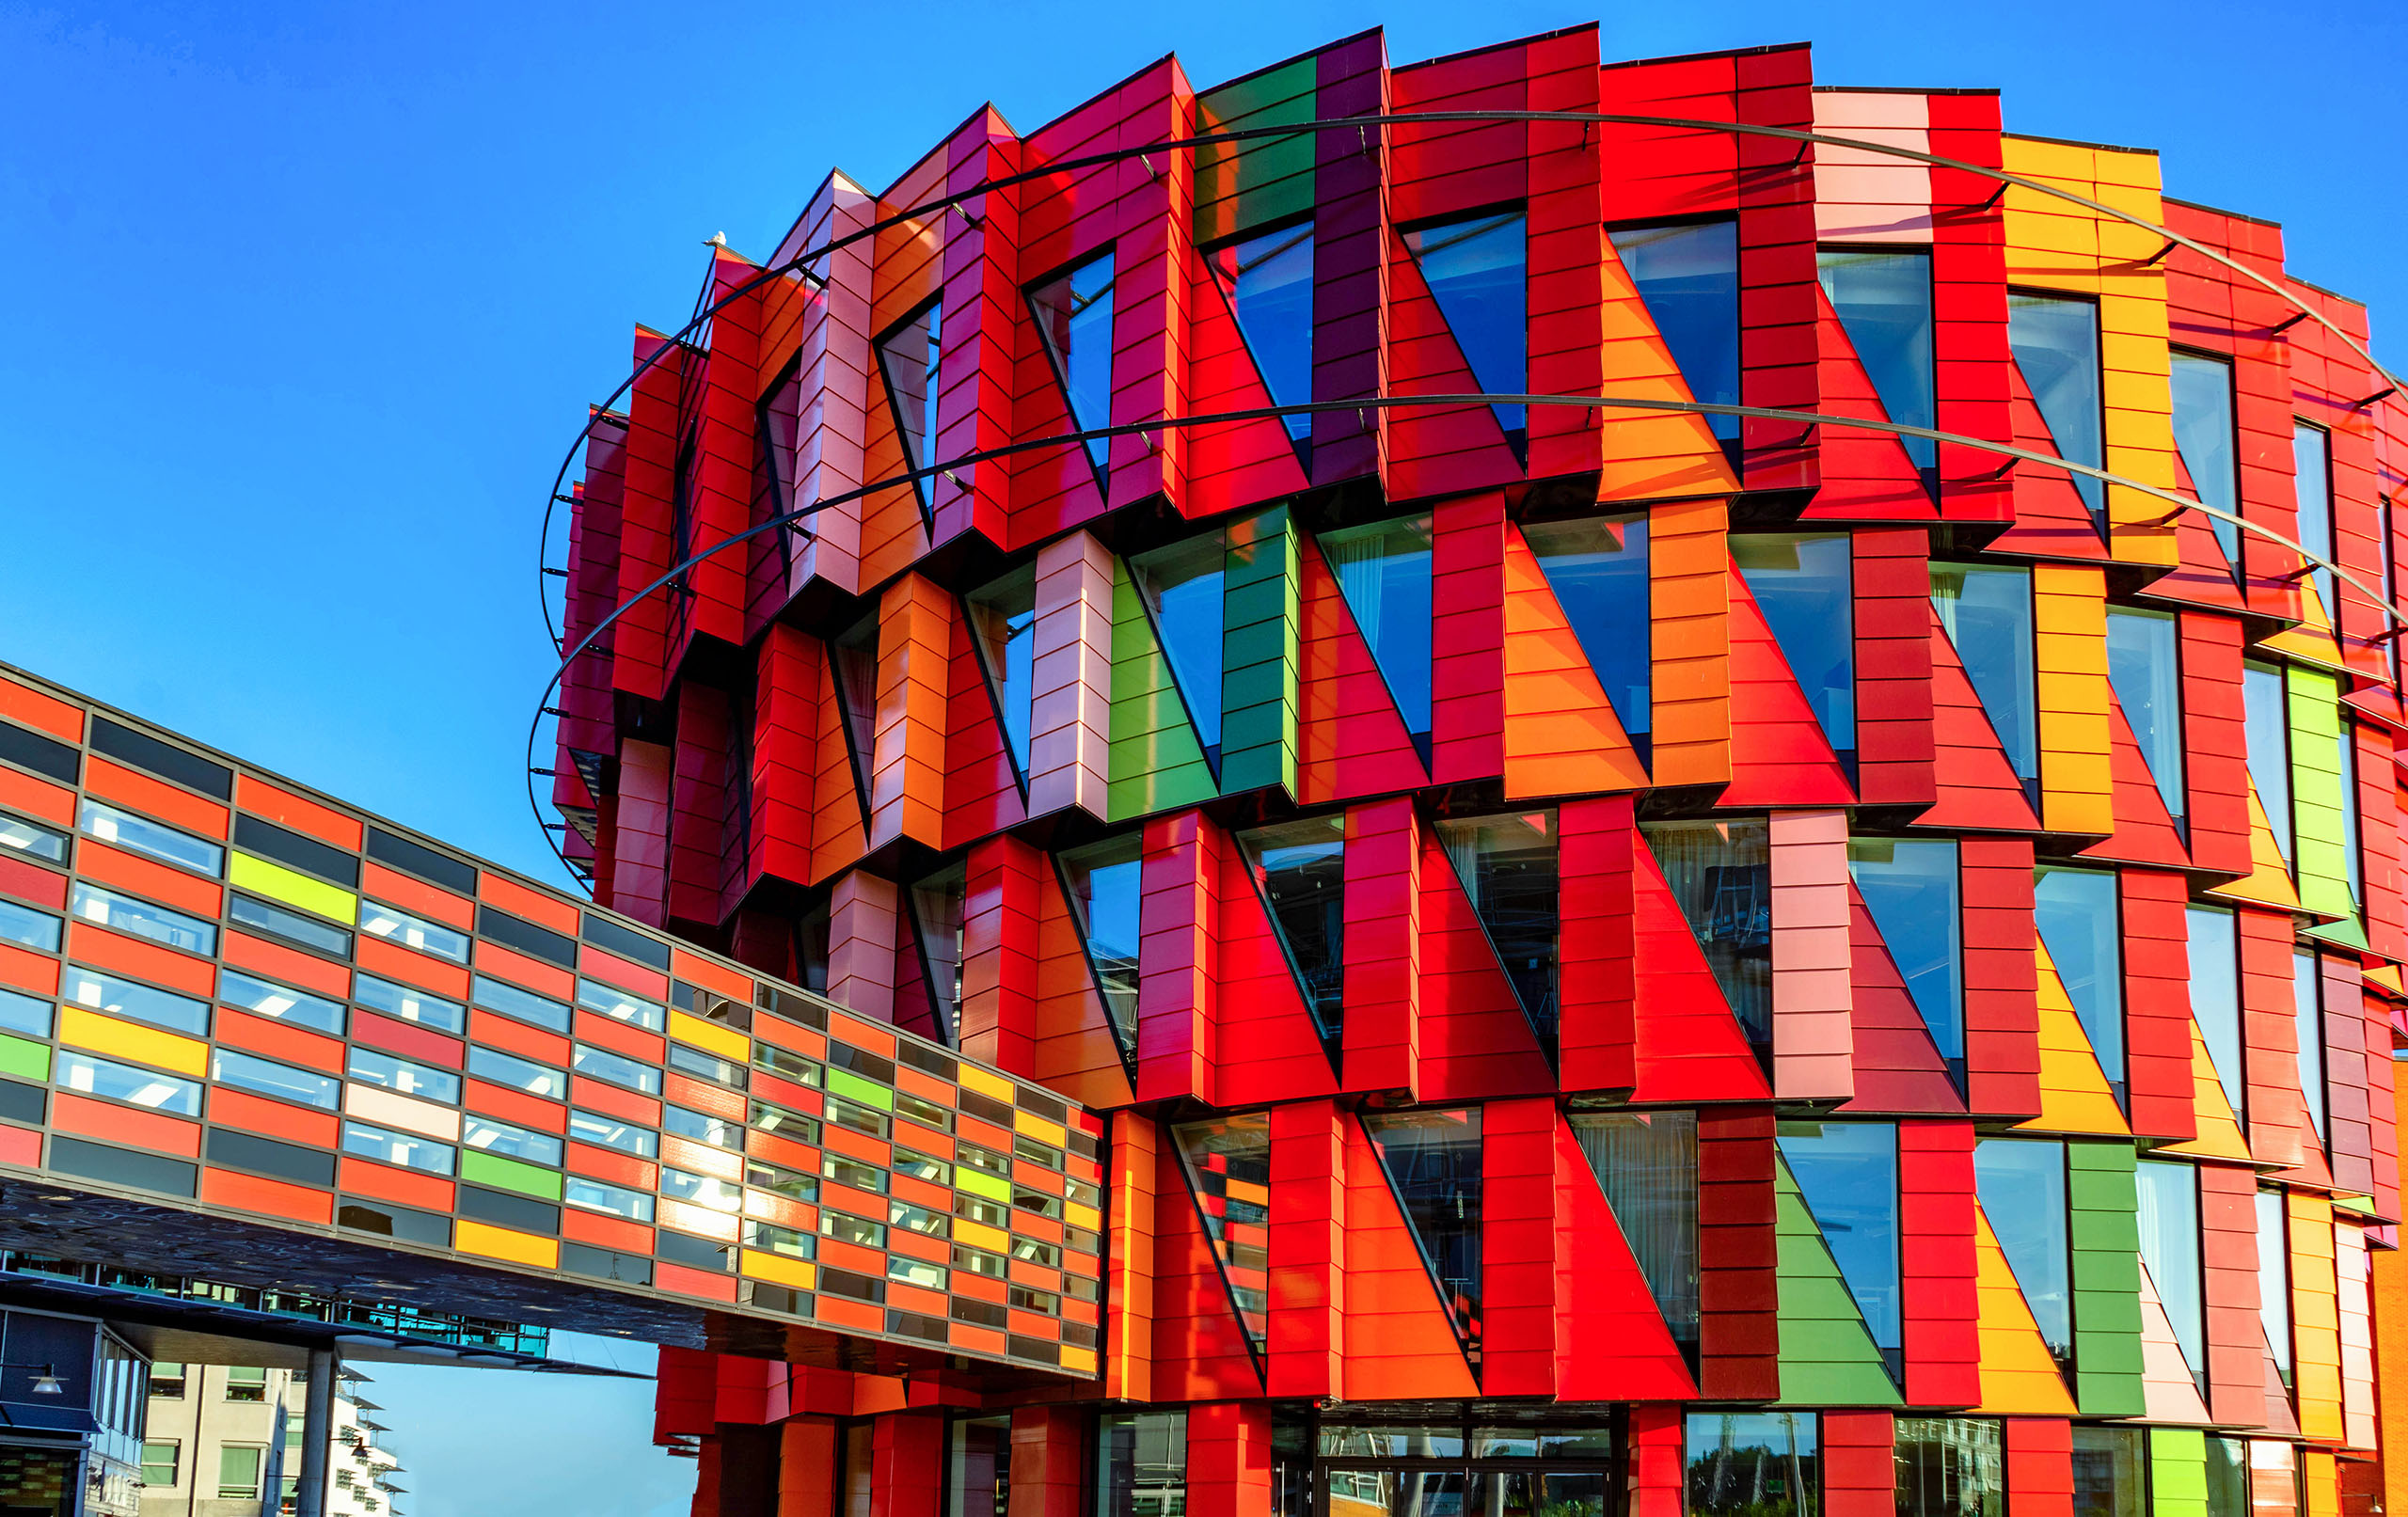 GOTHENBURG - SWEDEN 20. JULY 2018- Colorful modern arcitecture of the Chalmers technical university, Gothenburg, Sweden